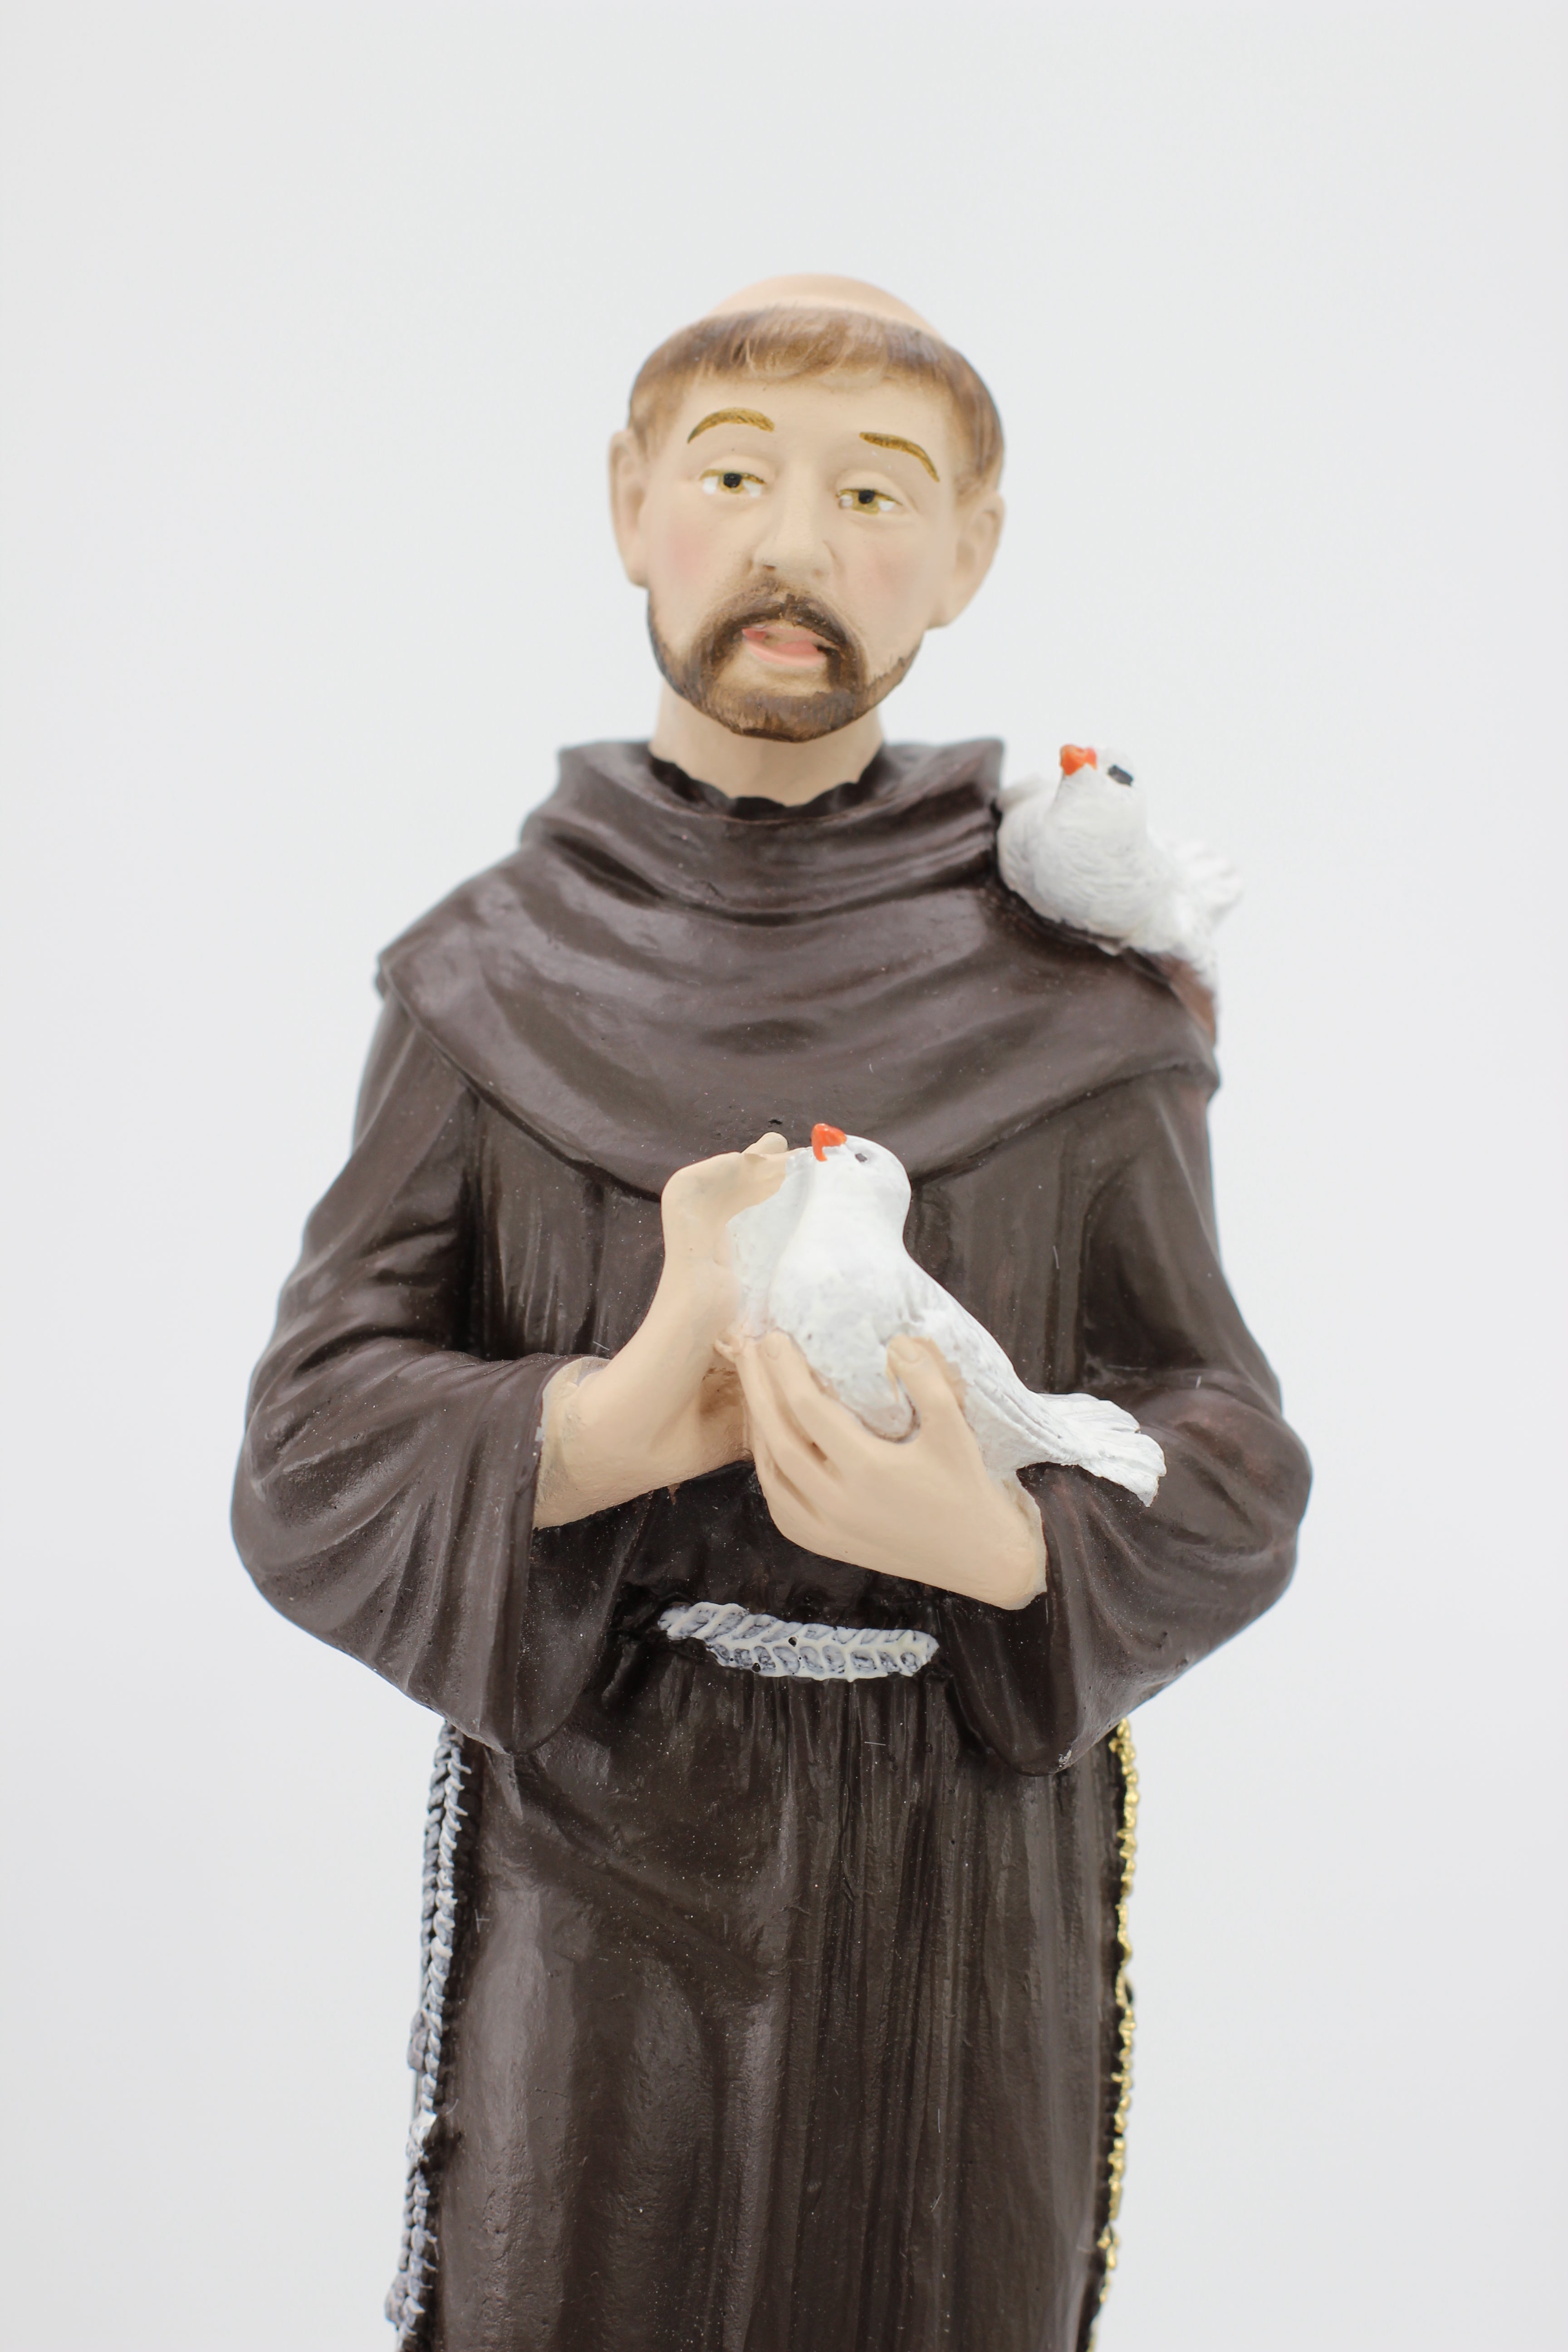 The Faith Gift Shop Saint Francis of Assisi statue - Hand Painted in Italy - Our Tuscany Collection - Estatua de San Francisco de Asis